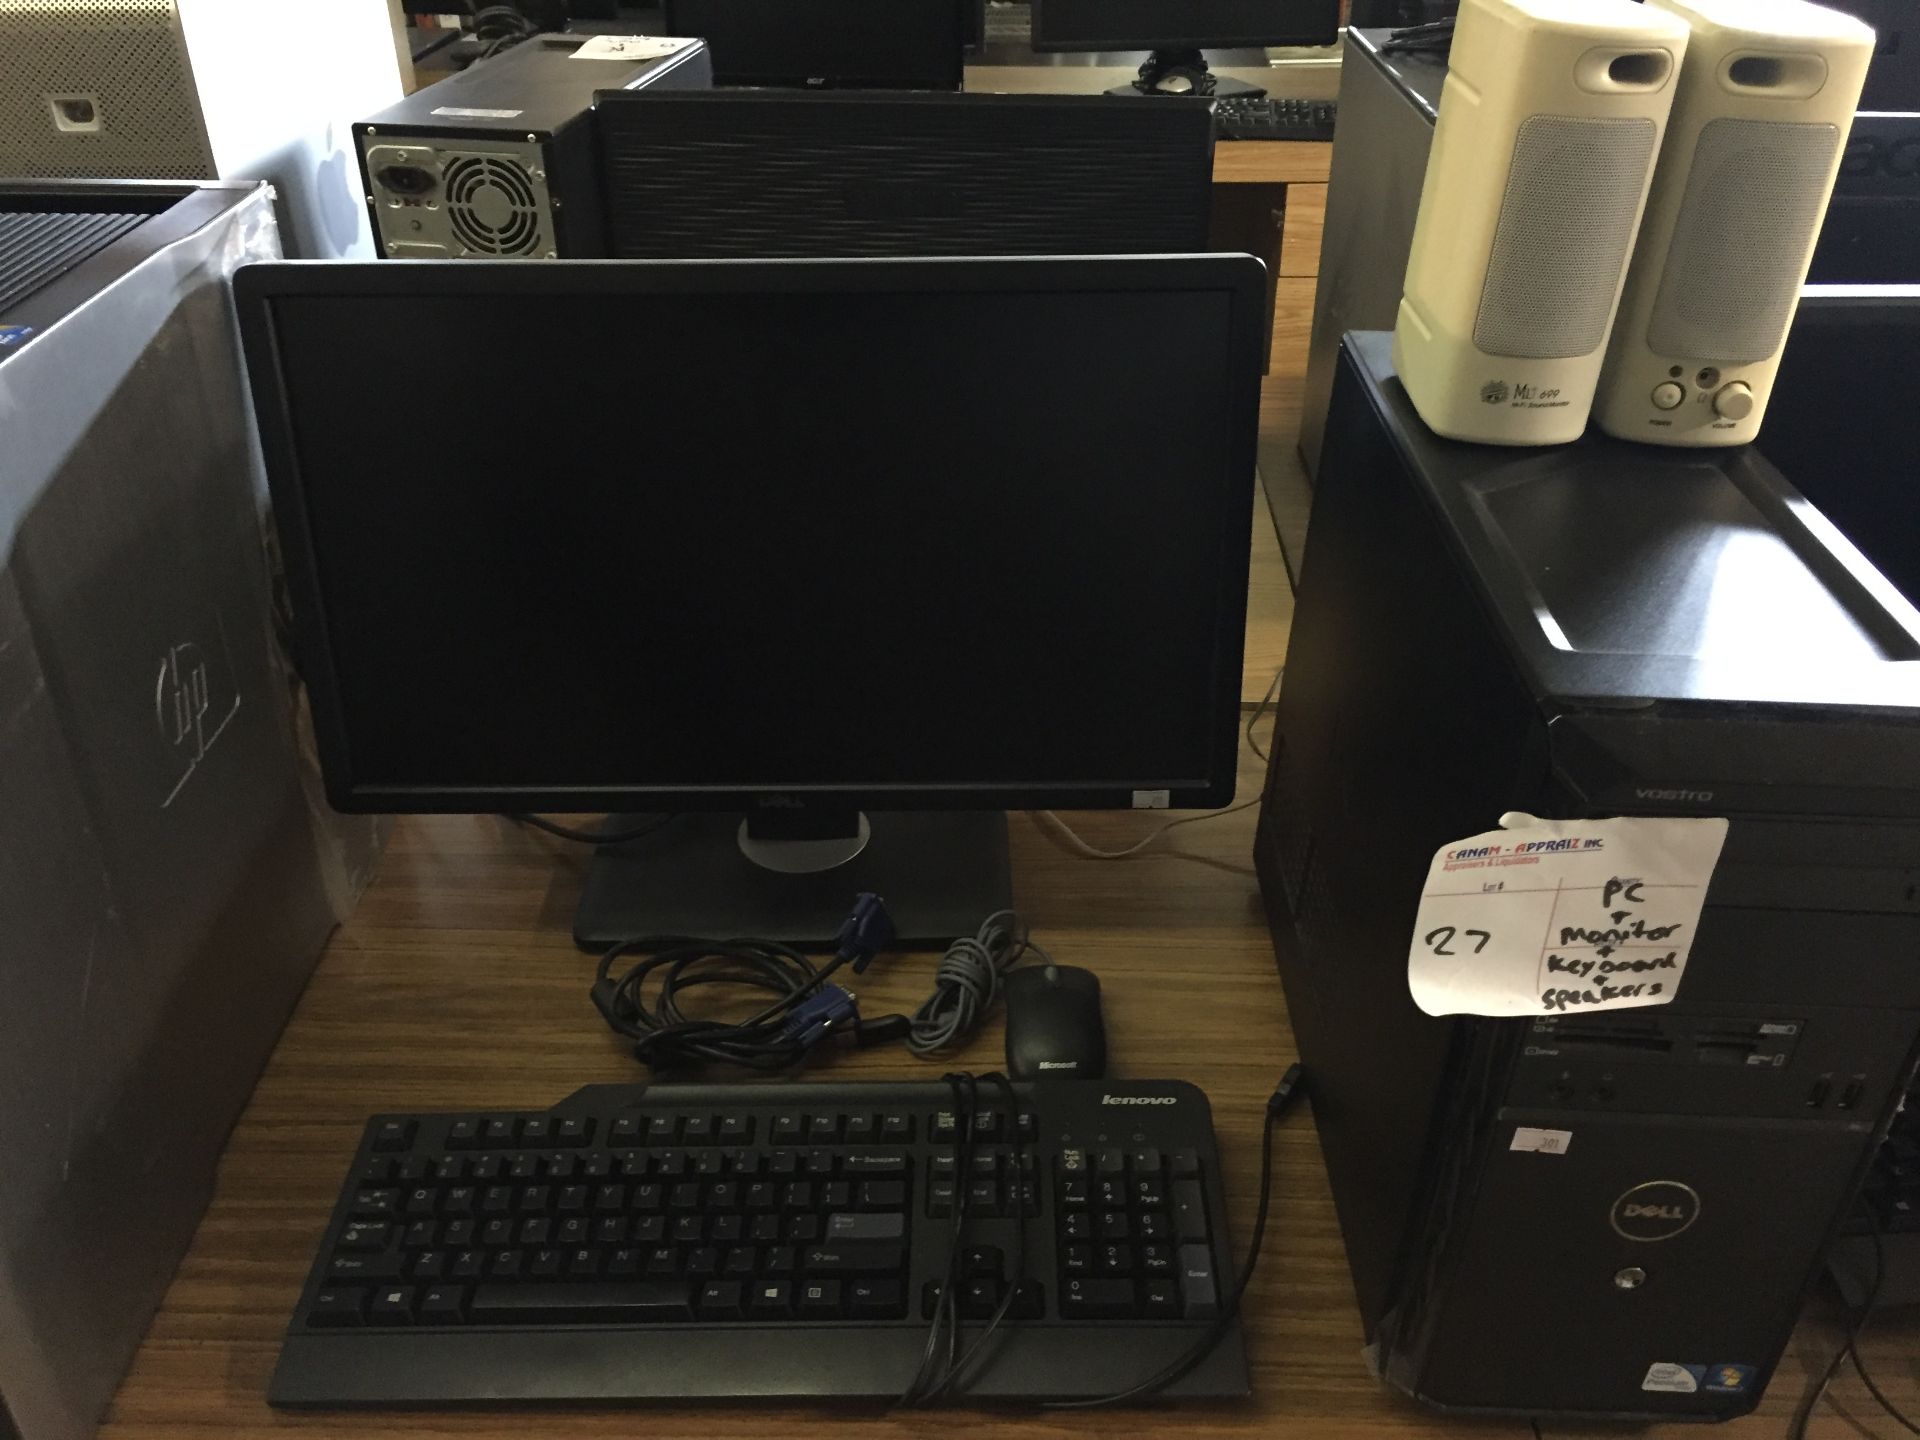 PC, MONITOR, KEYBOARD, MOUSE AND SPEAKERS - 1PC, DELL PCVOSCO DO7M - 1PC